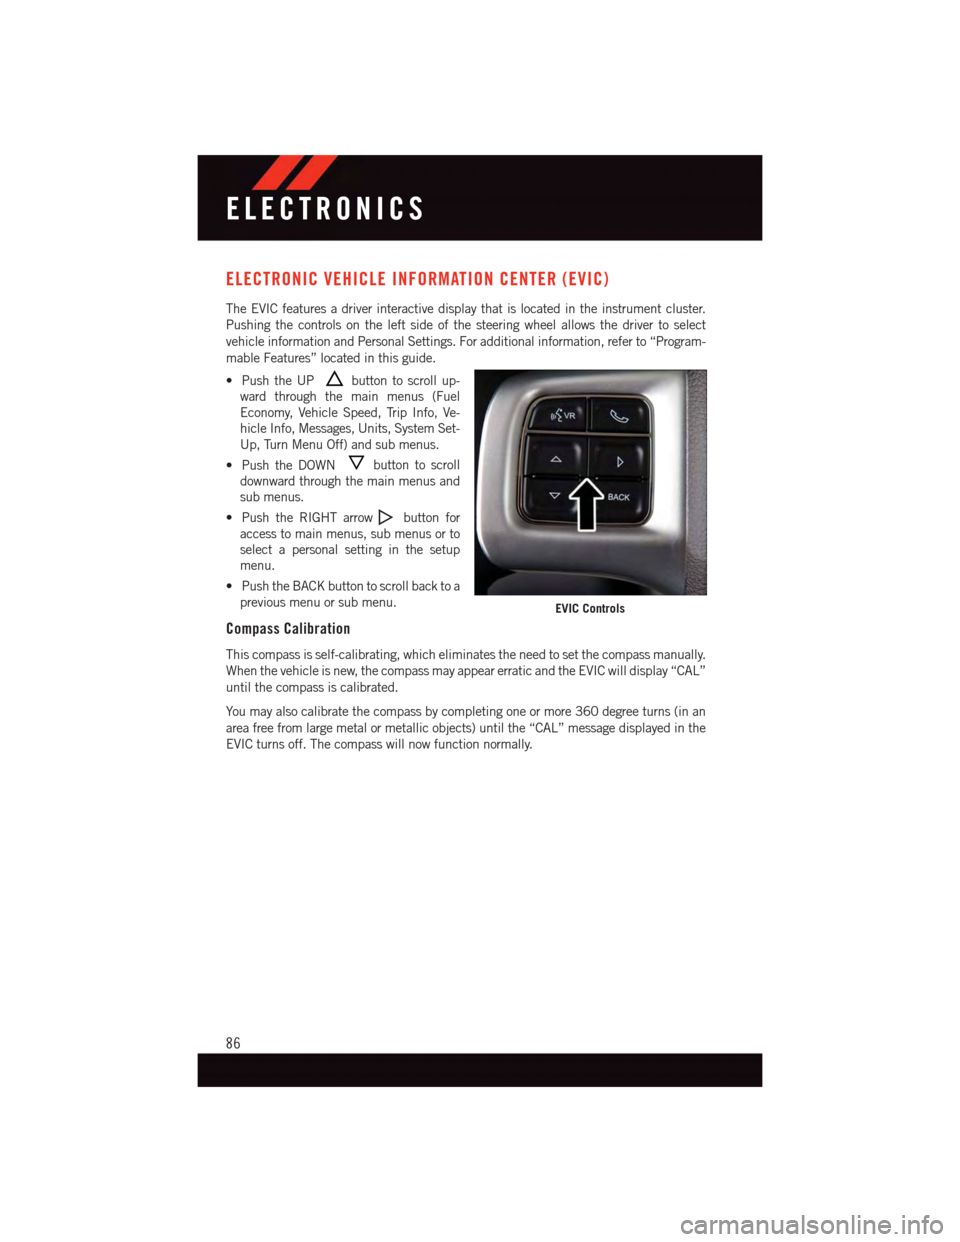 DODGE GRAND CARAVAN 2015 5.G User Guide ELECTRONIC VEHICLE INFORMATION CENTER (EVIC)
The EVIC features a driver interactive display that is located in the instrument cluster.
Pushing the controls on the left side of the steering wheel allow